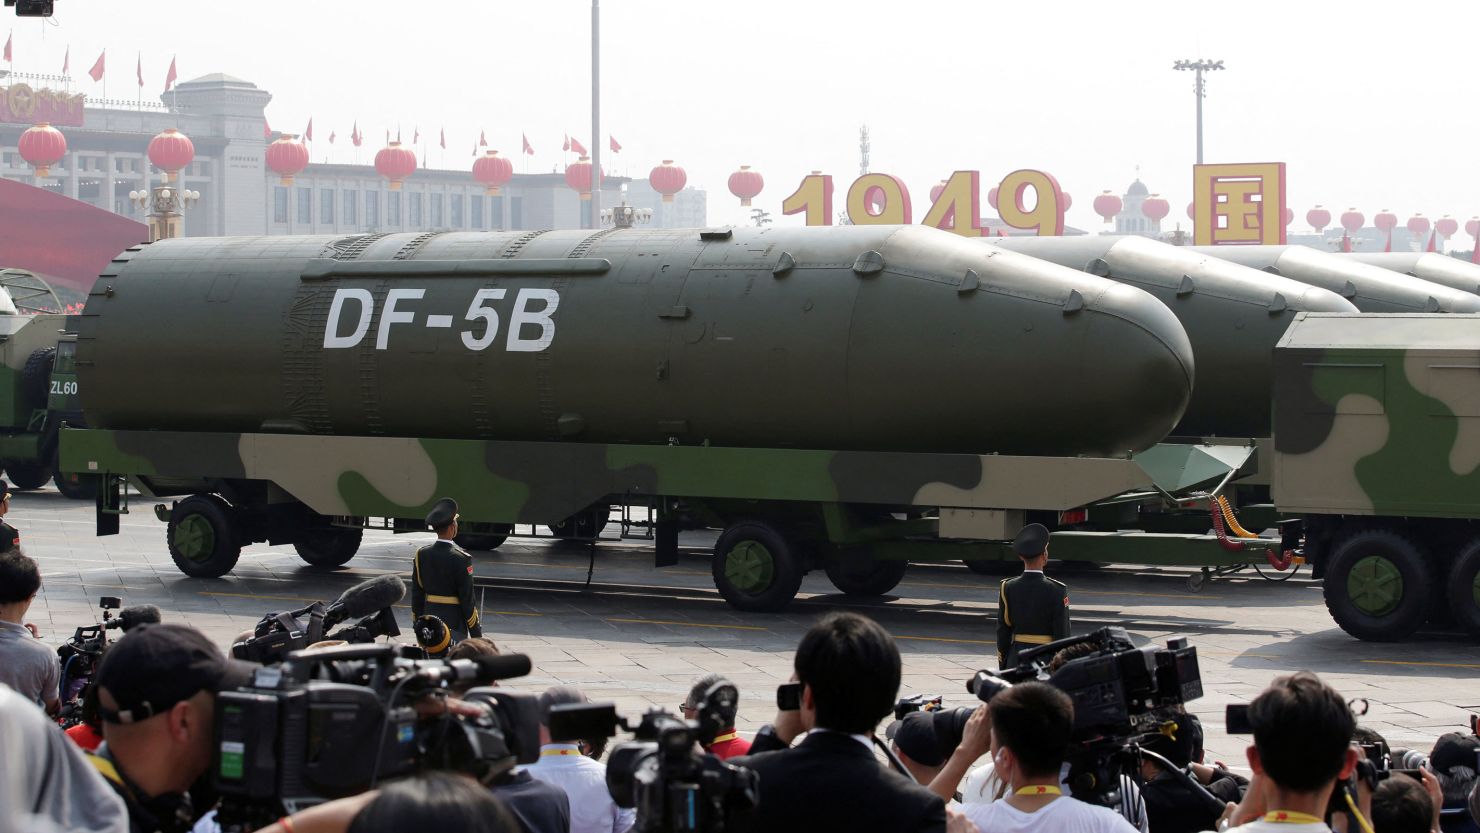 In this 2019 photo, military vehicles carrying DF-5B intercontinental ballistic missiles travel past Tiananmen Square during the military parade marking the 70th founding anniversary of People's Republic of China, on its National Day in Beijing.